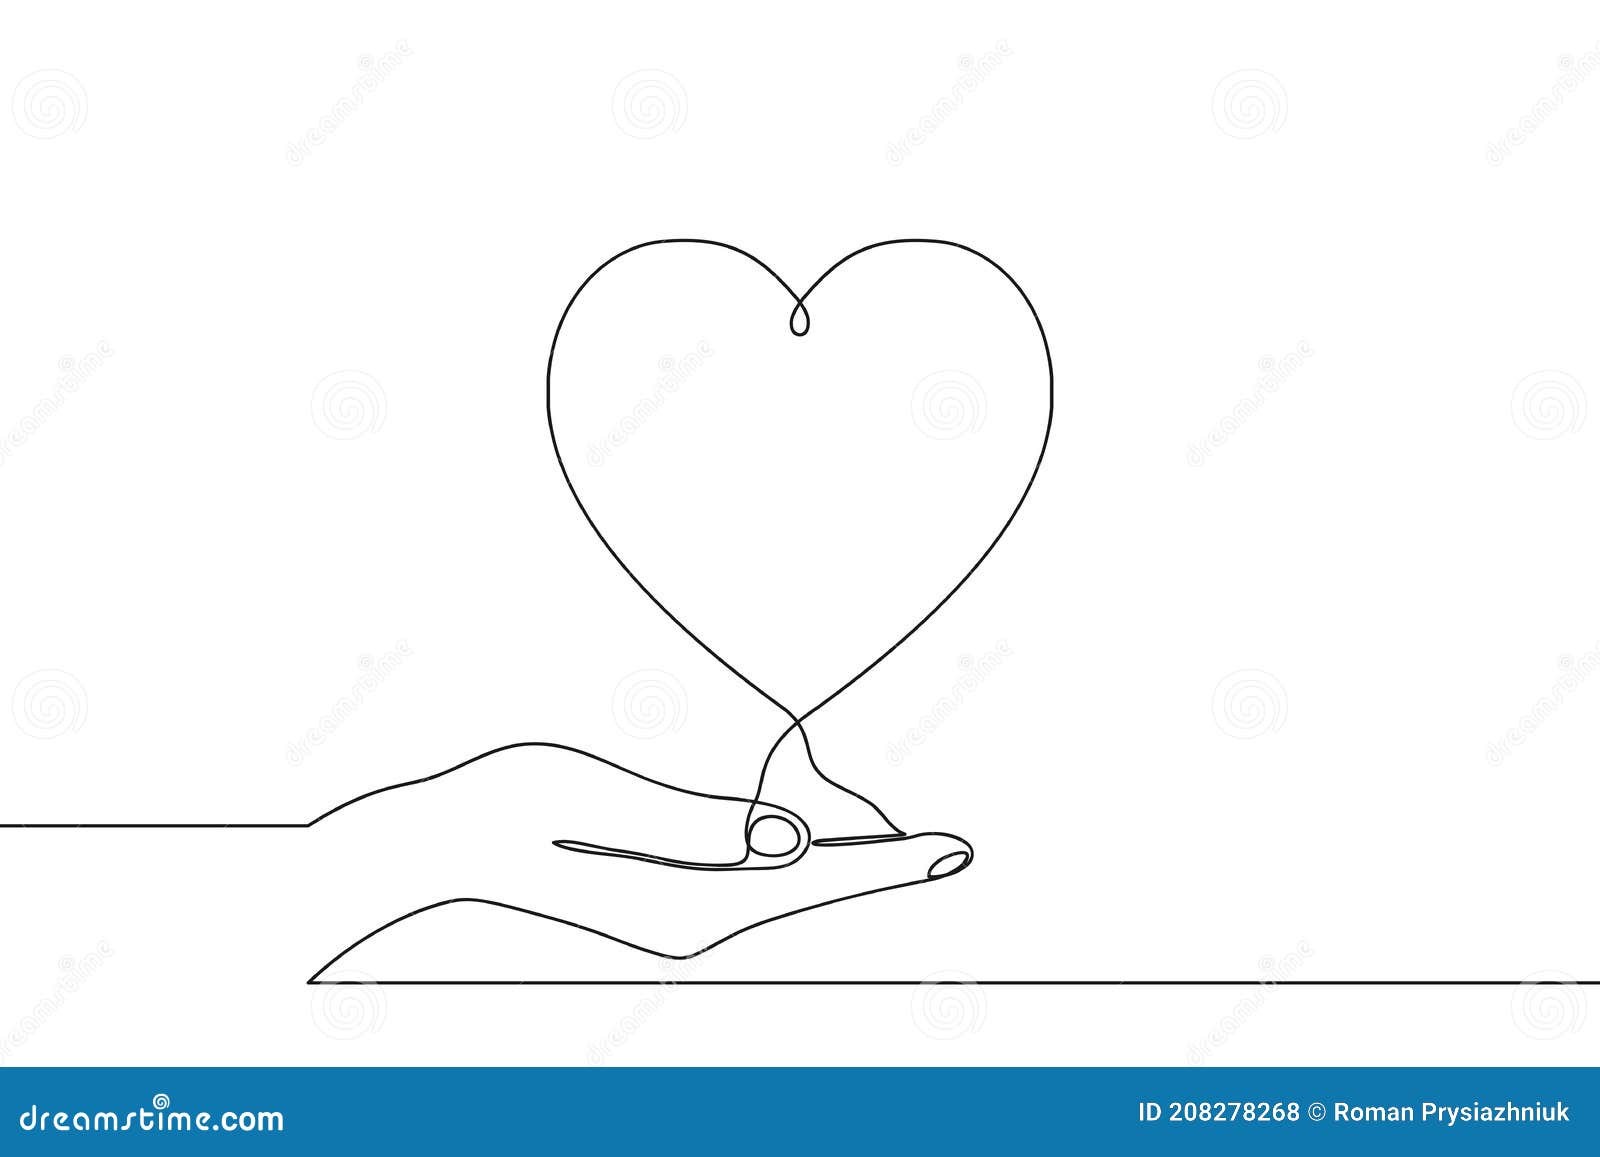 continuous one line drawing of hand holding heart on palm. 